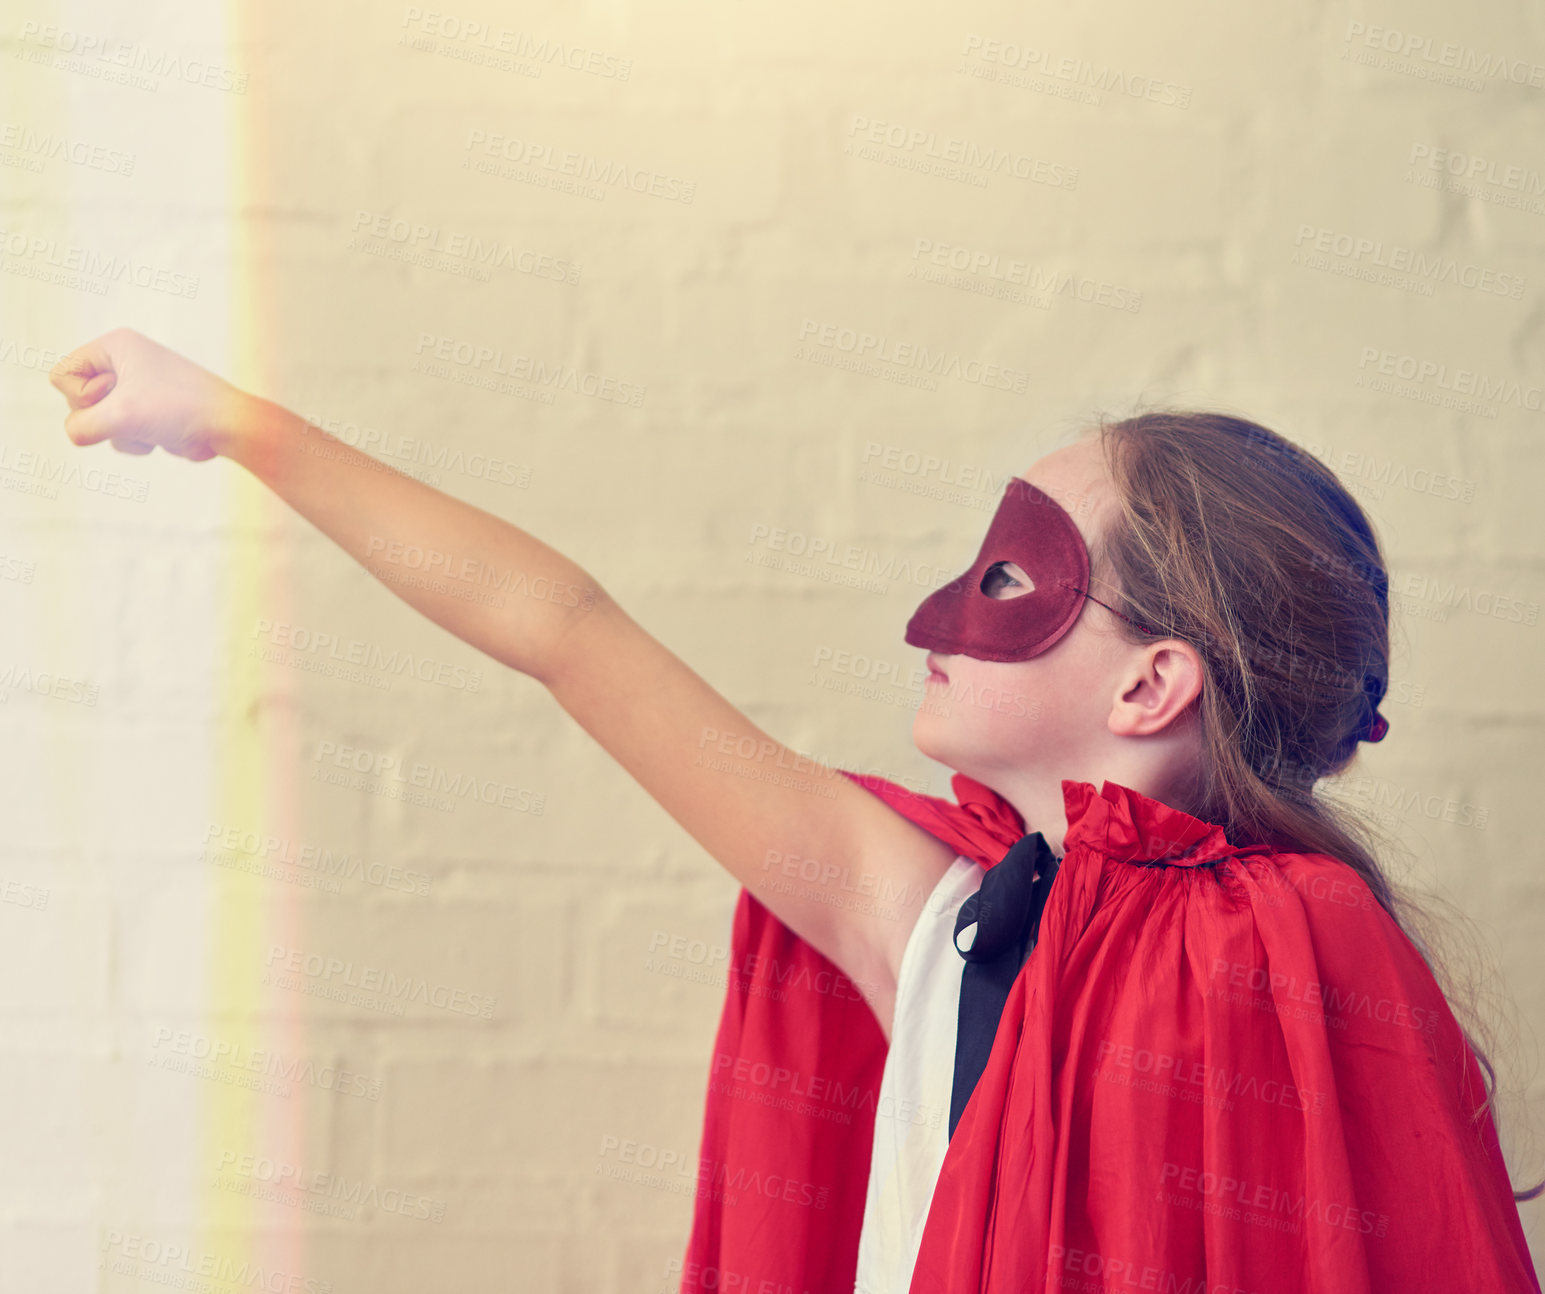 Buy stock photo Cropped shot of a little girl pretending to be a superhero